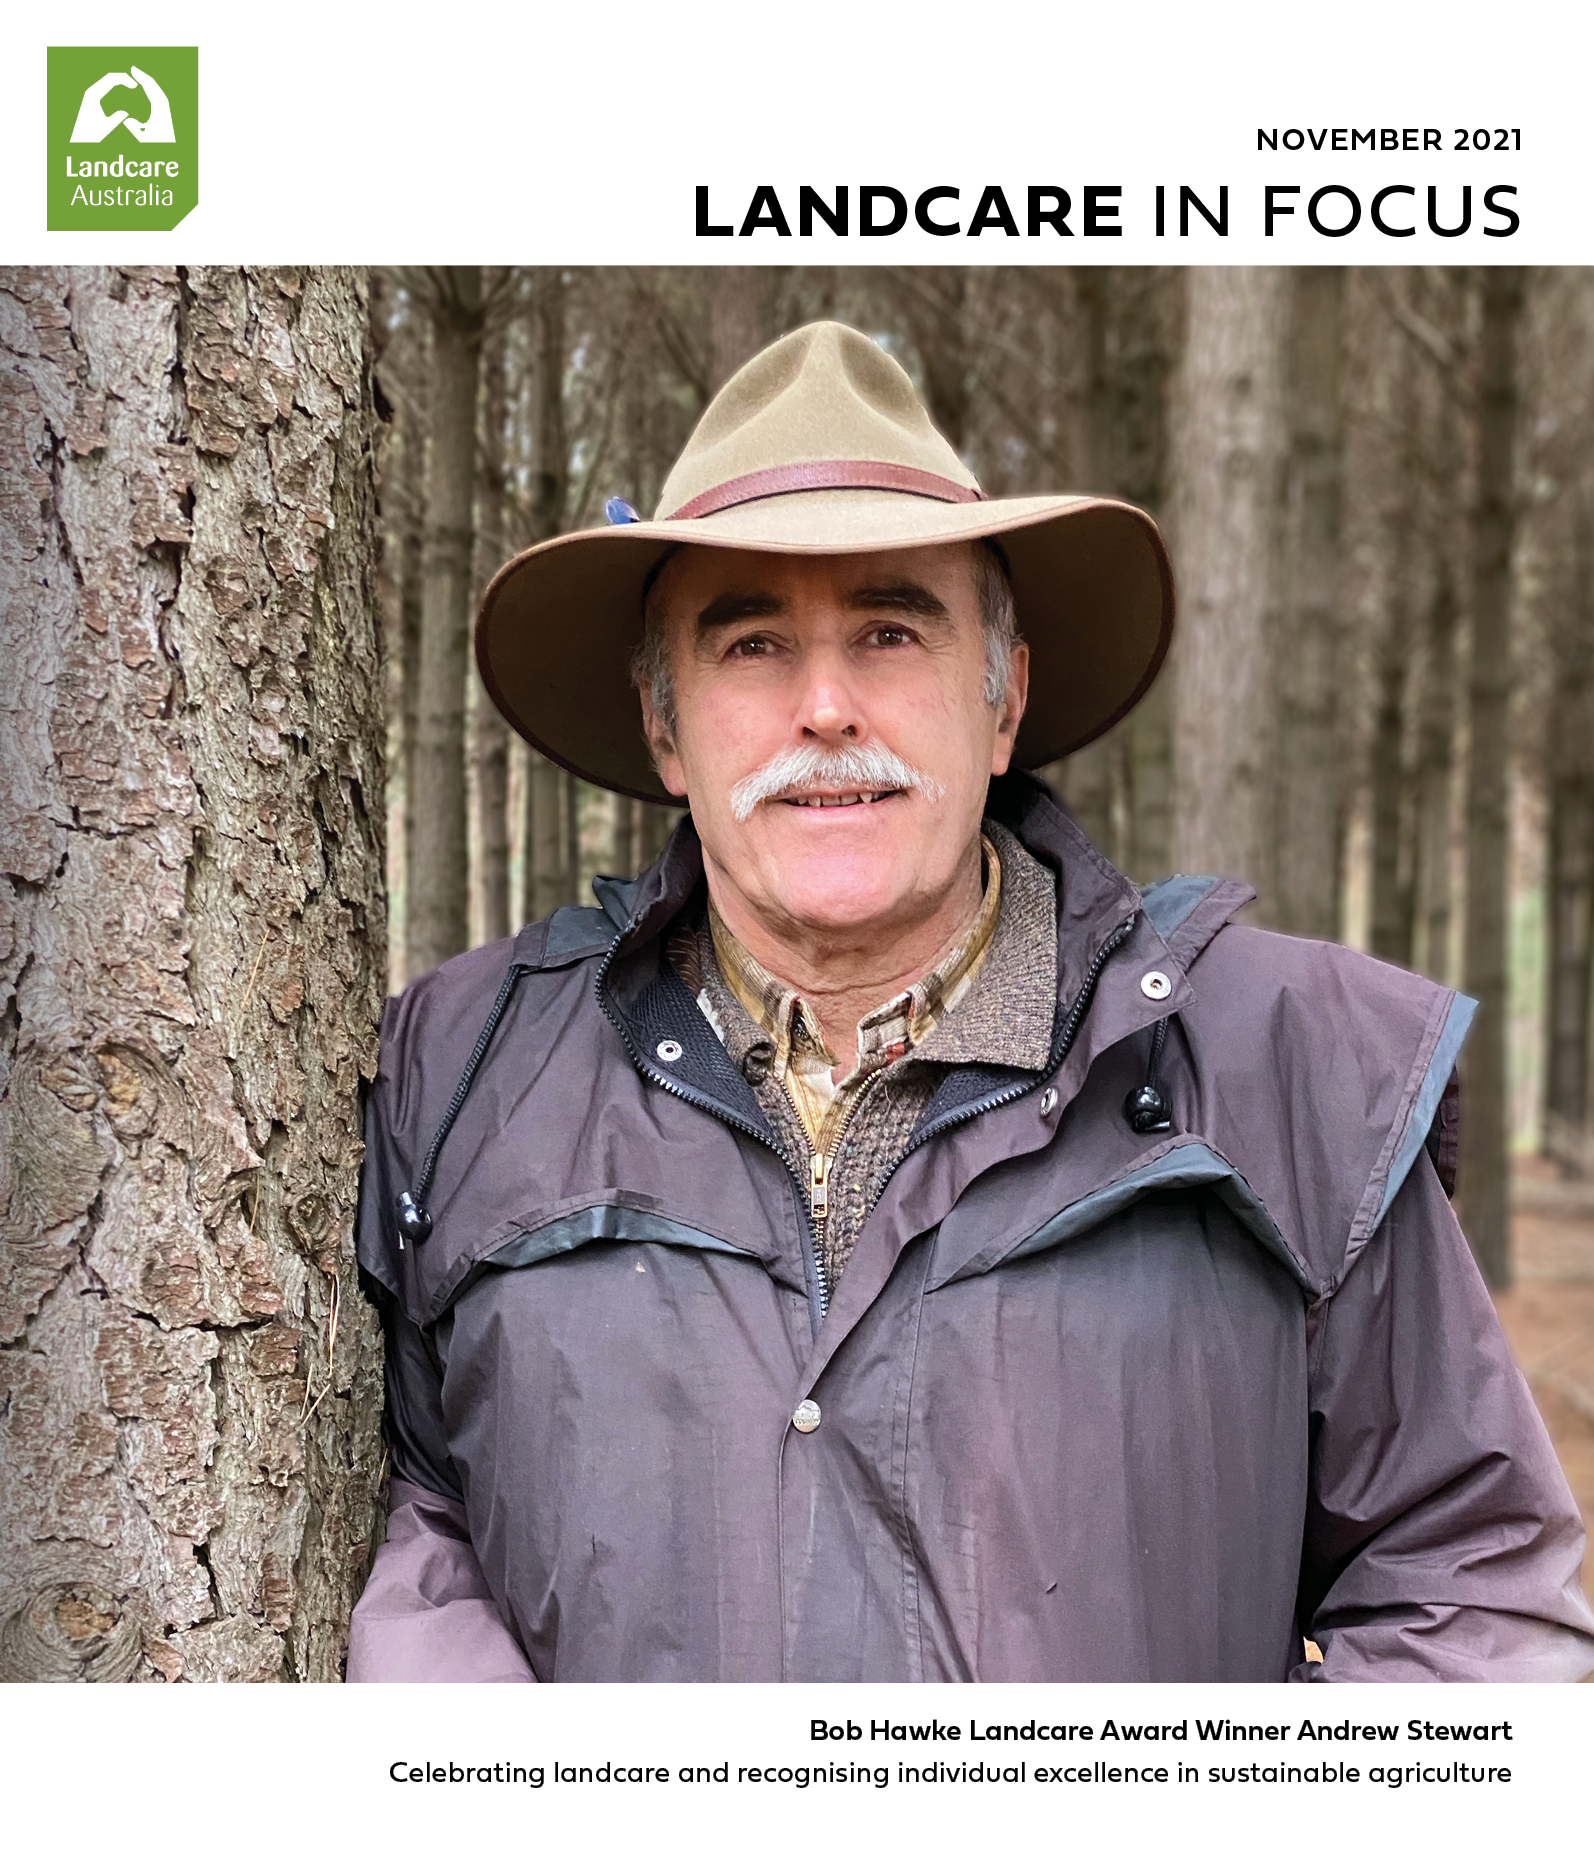 Cover of Landcare in Focus Magazine November 2021 Issues featuring Andrew Stuart